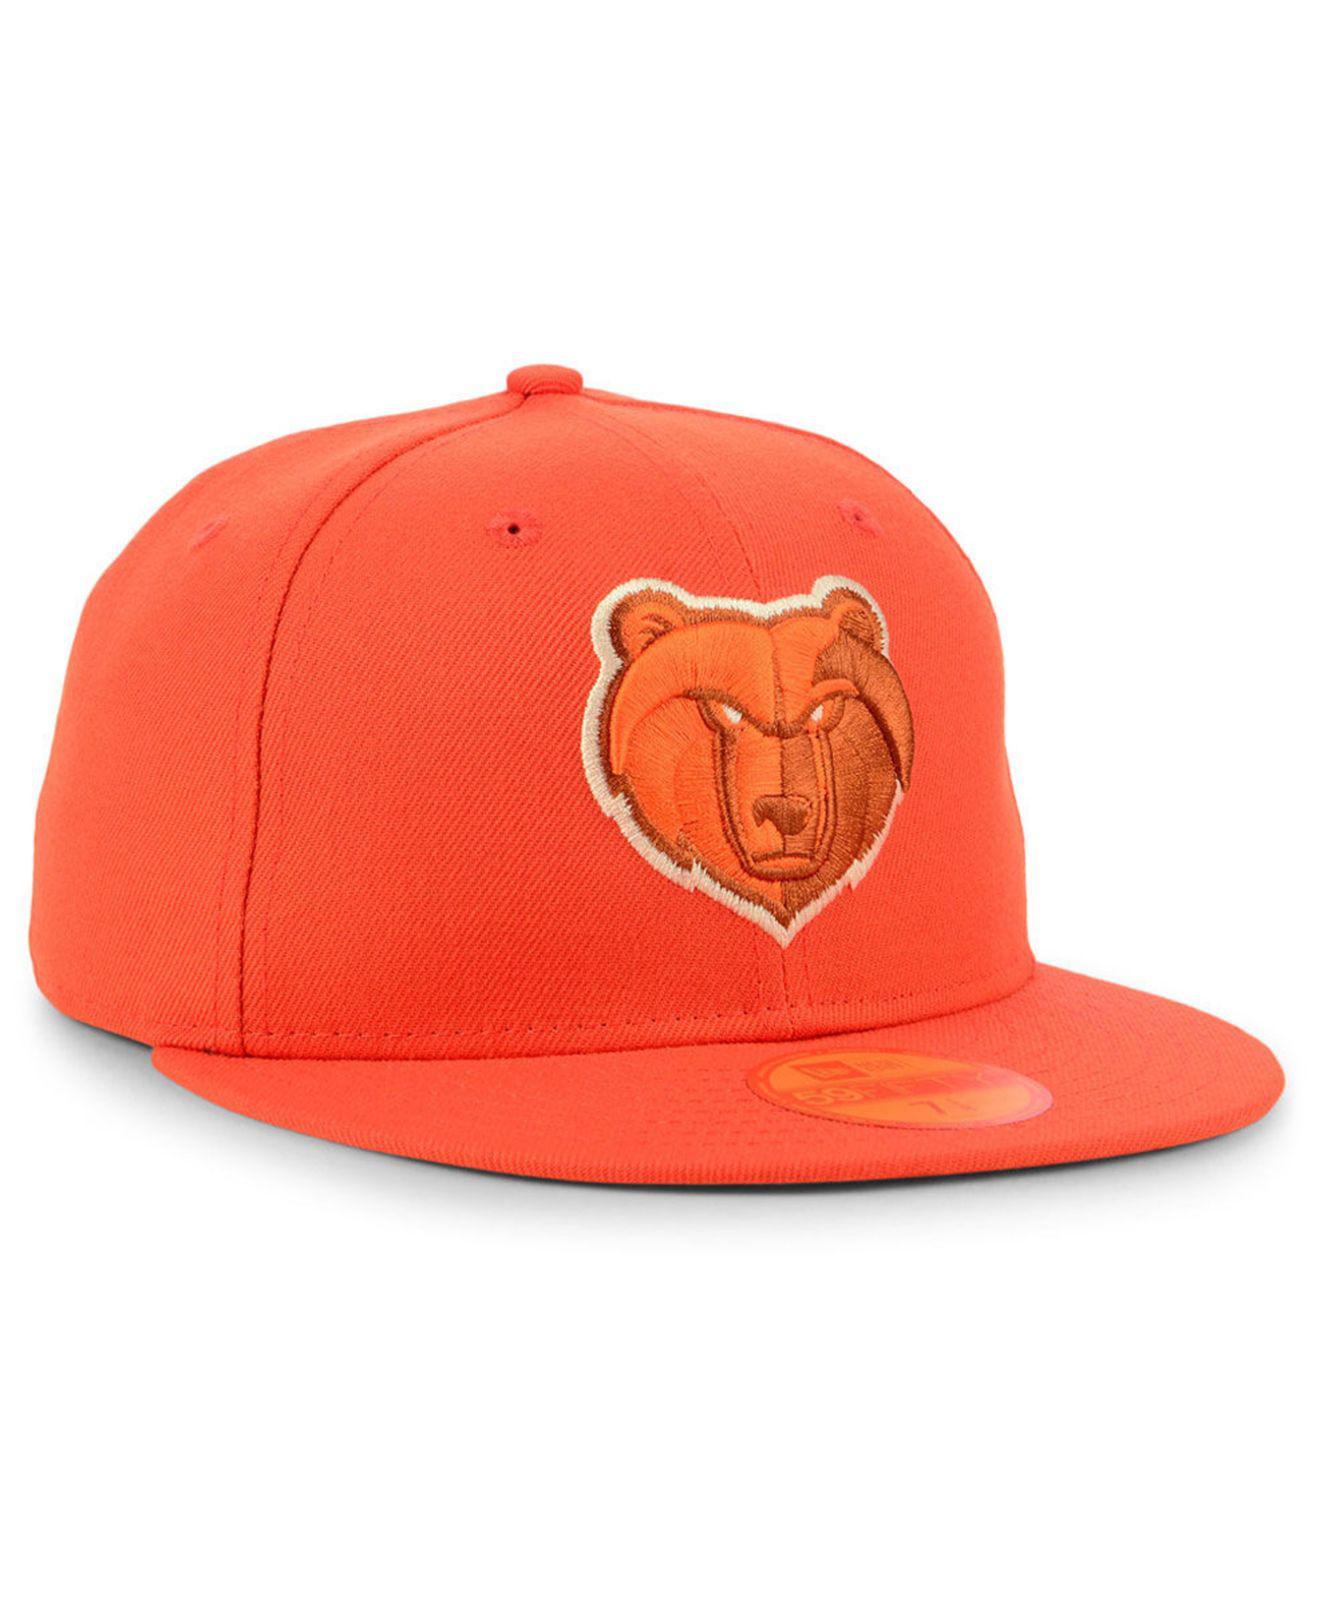 KTZ Memphis Grizzlies Color Prism Pack 59fifty Fitted Cap in Orange for Men